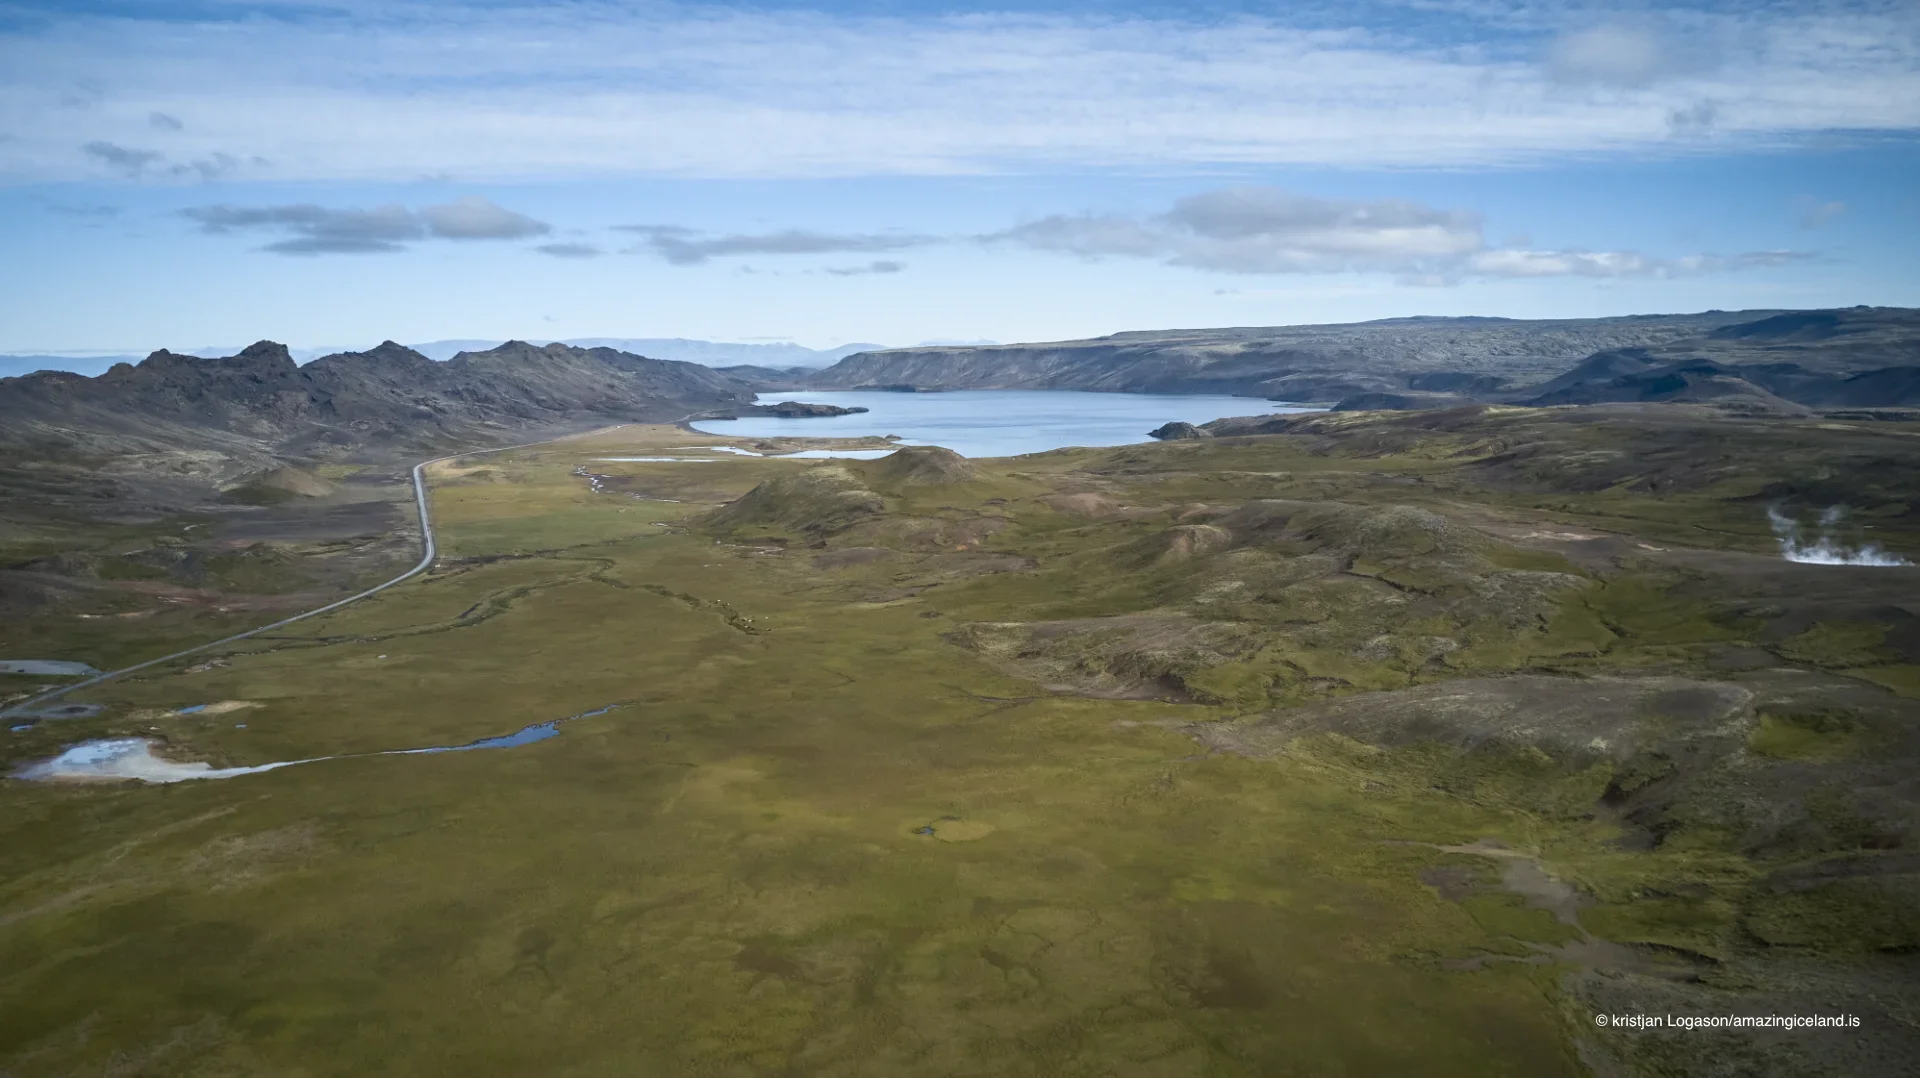 Birds eye view of lake Kleifarvatn with Sveifluháls moberg ridge on the left and Brennisteinsalda on the right. Stora Lambafell in the middle